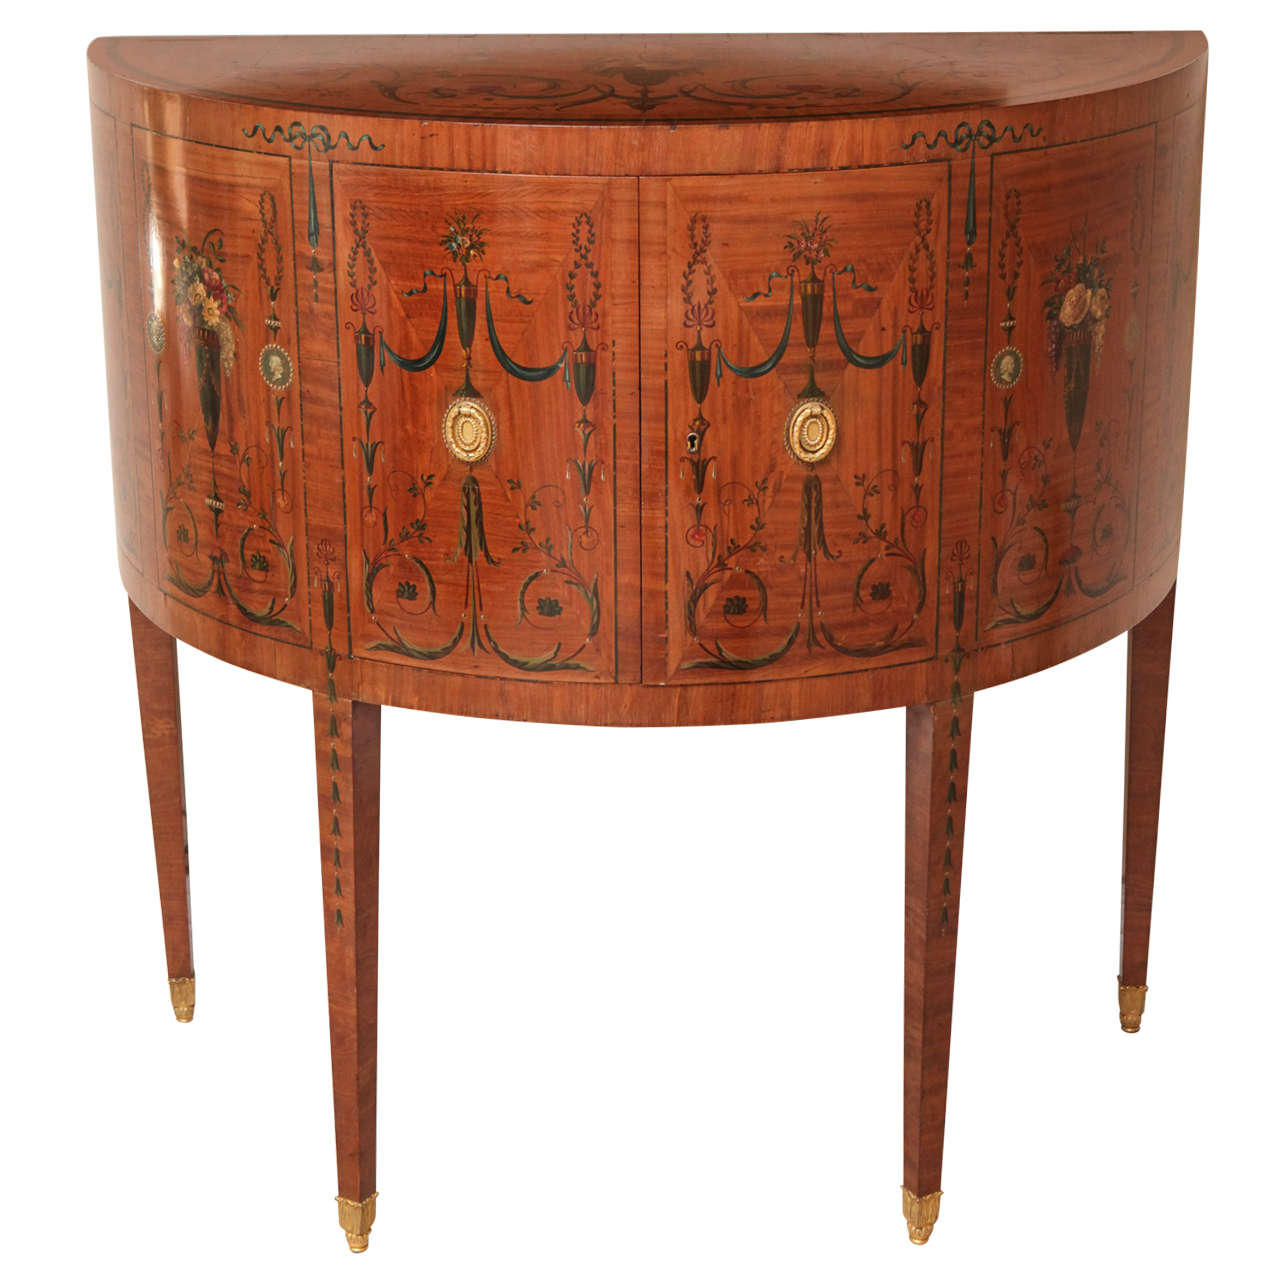 19th Century Edward Caldwell Satinwood Demilune Console Table For Sale